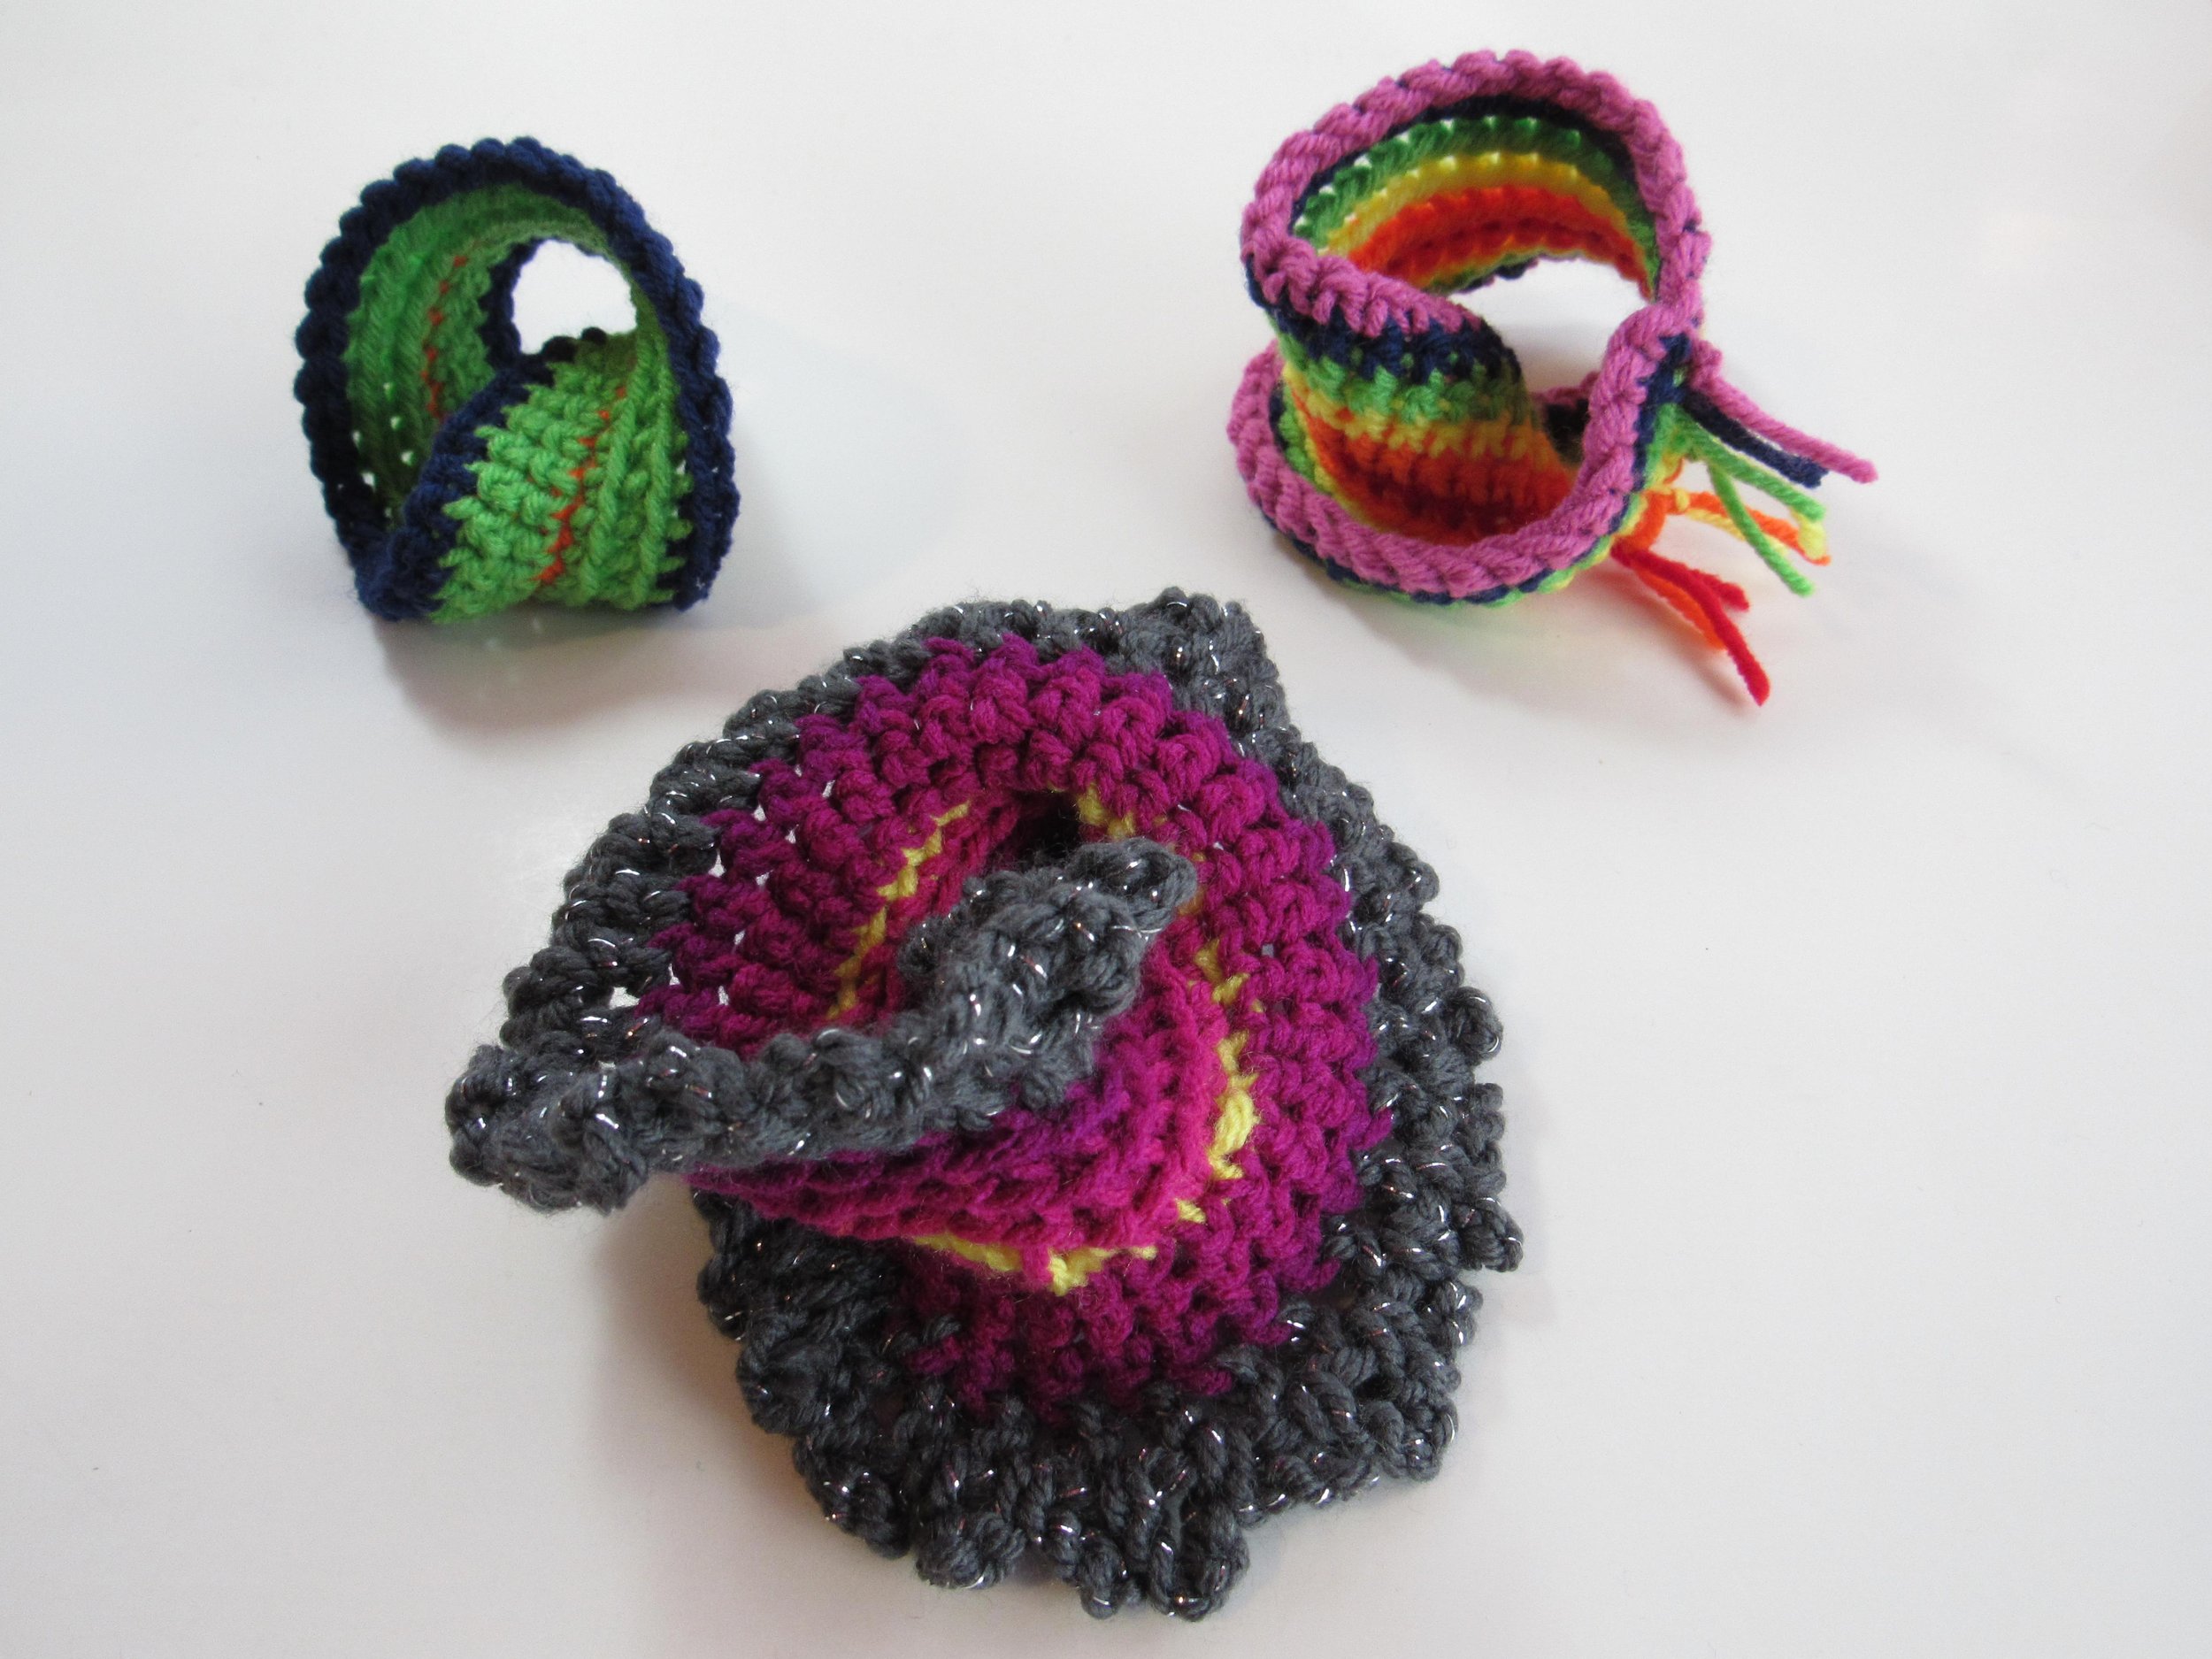 Learn-to-Crochet Infinity (Mobius) Cuffs